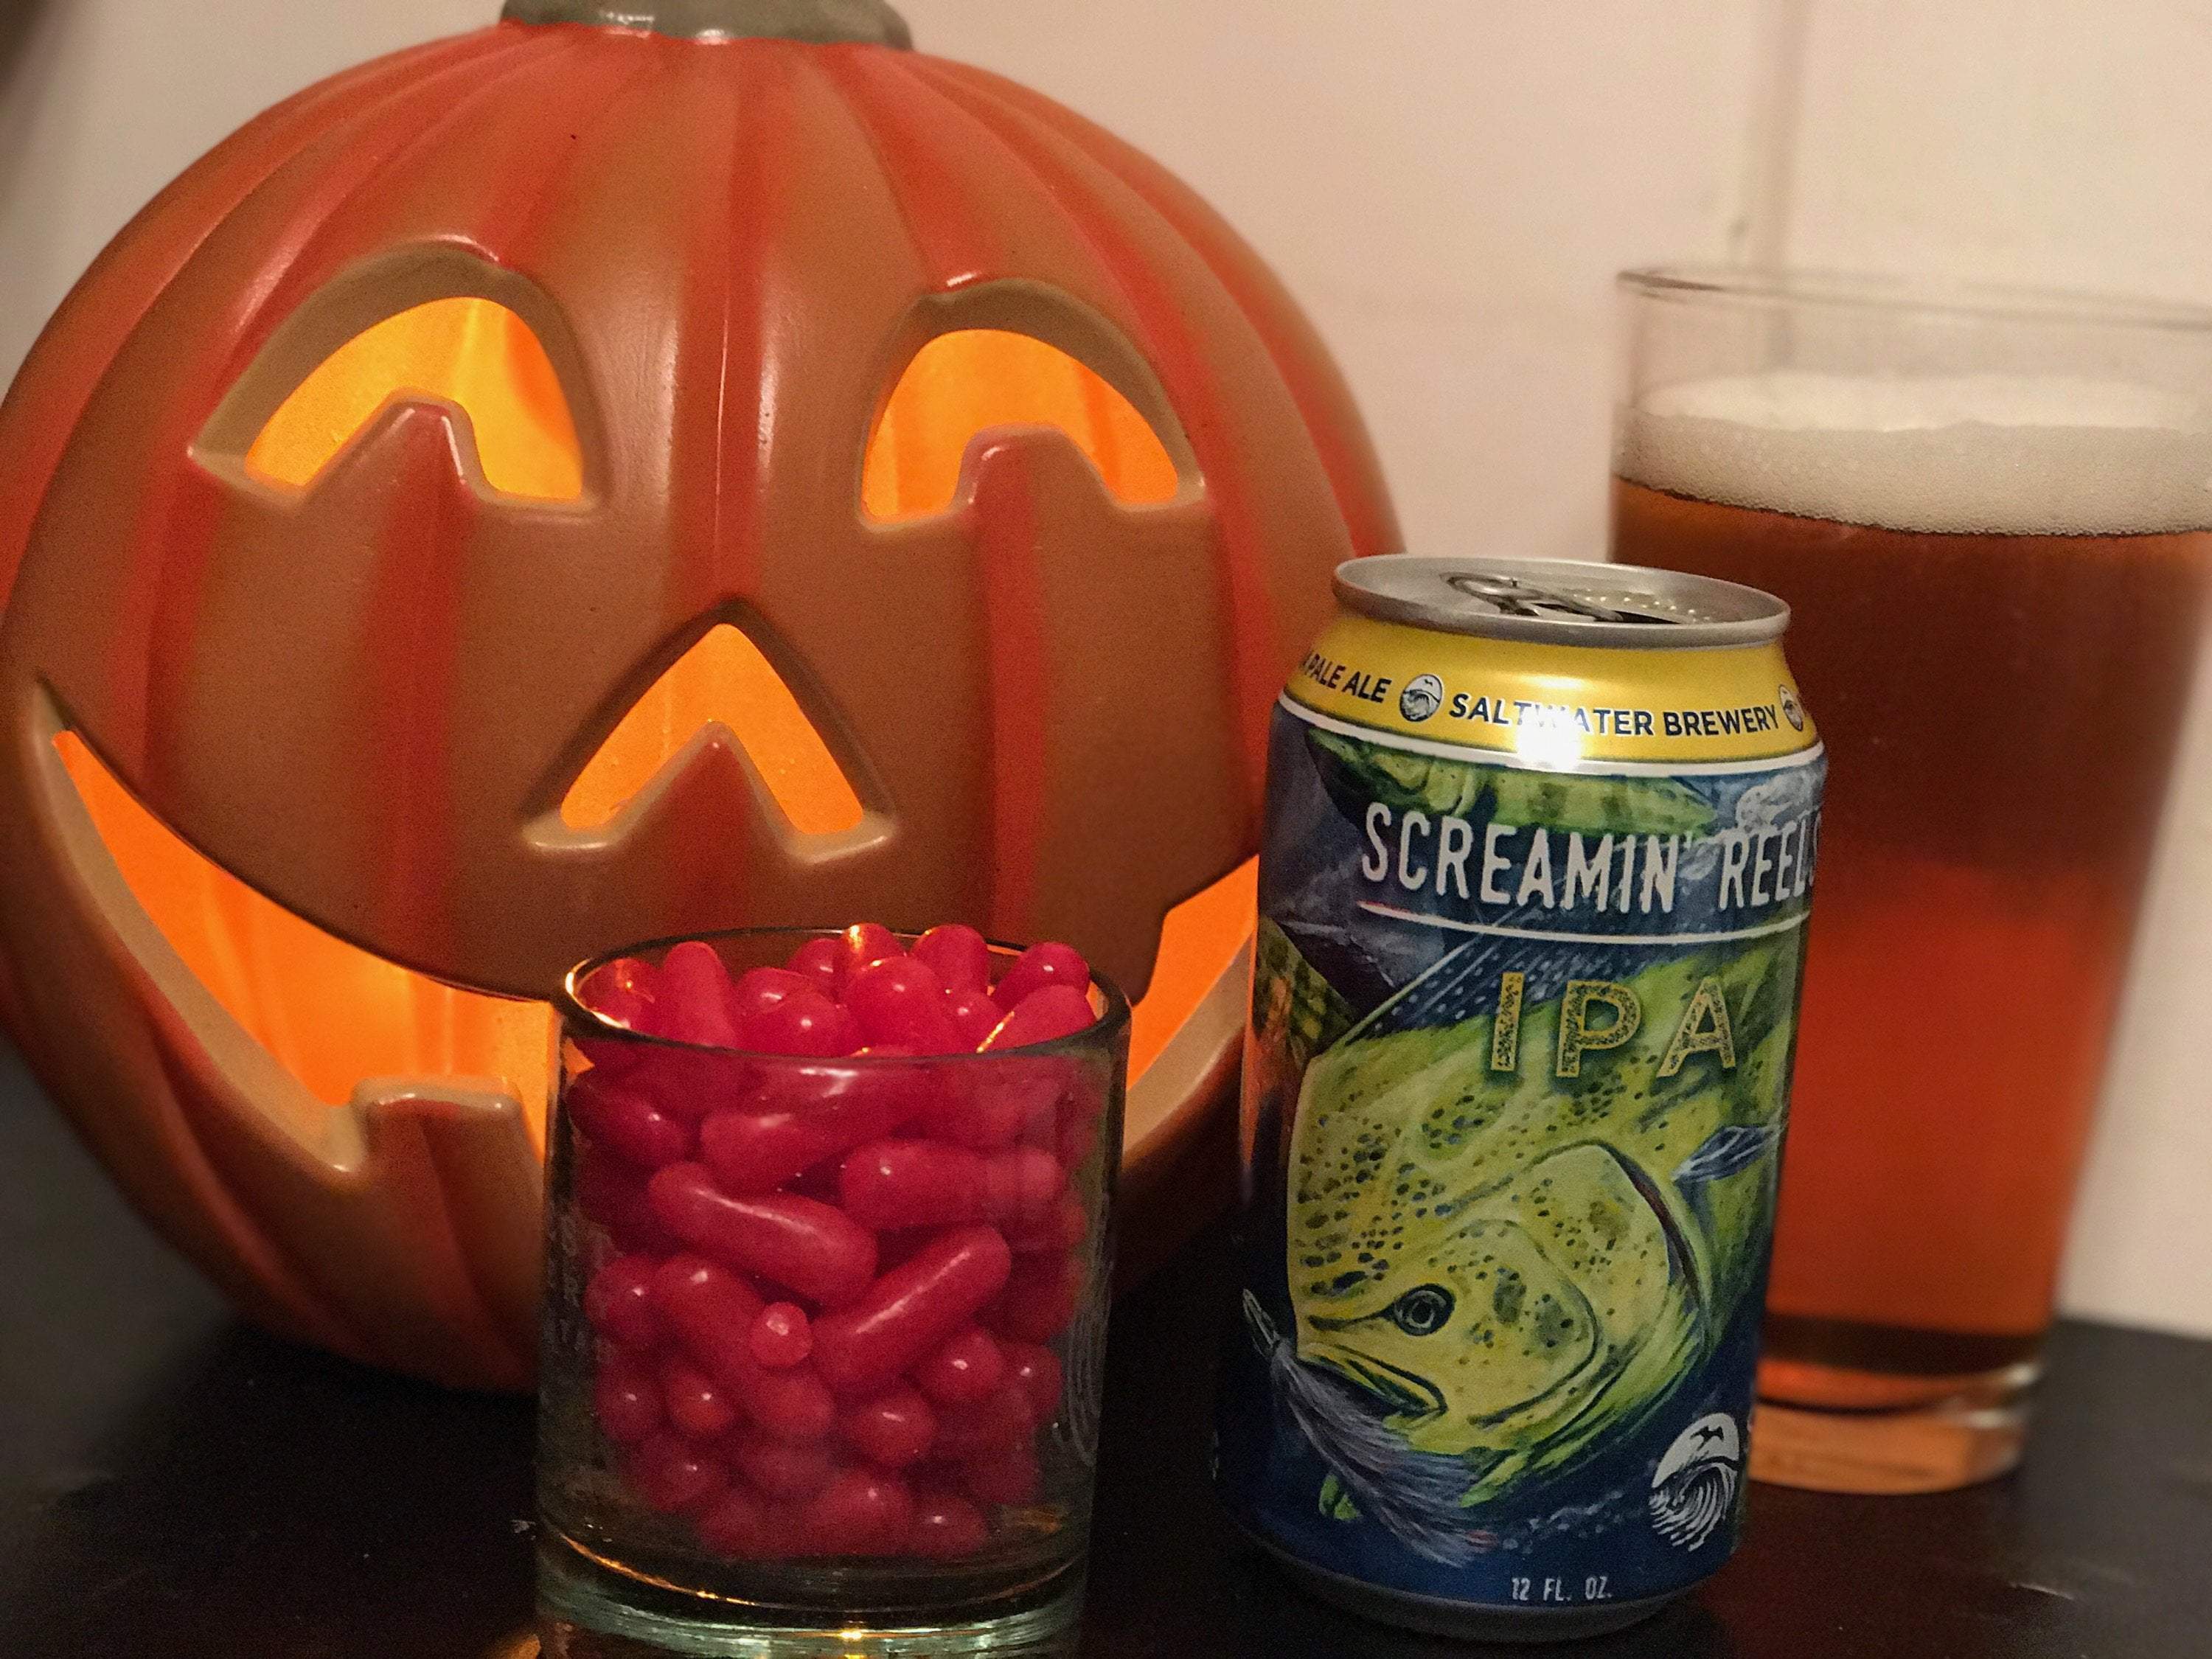 October 26th - What's Brewing at Saltwater Brewery